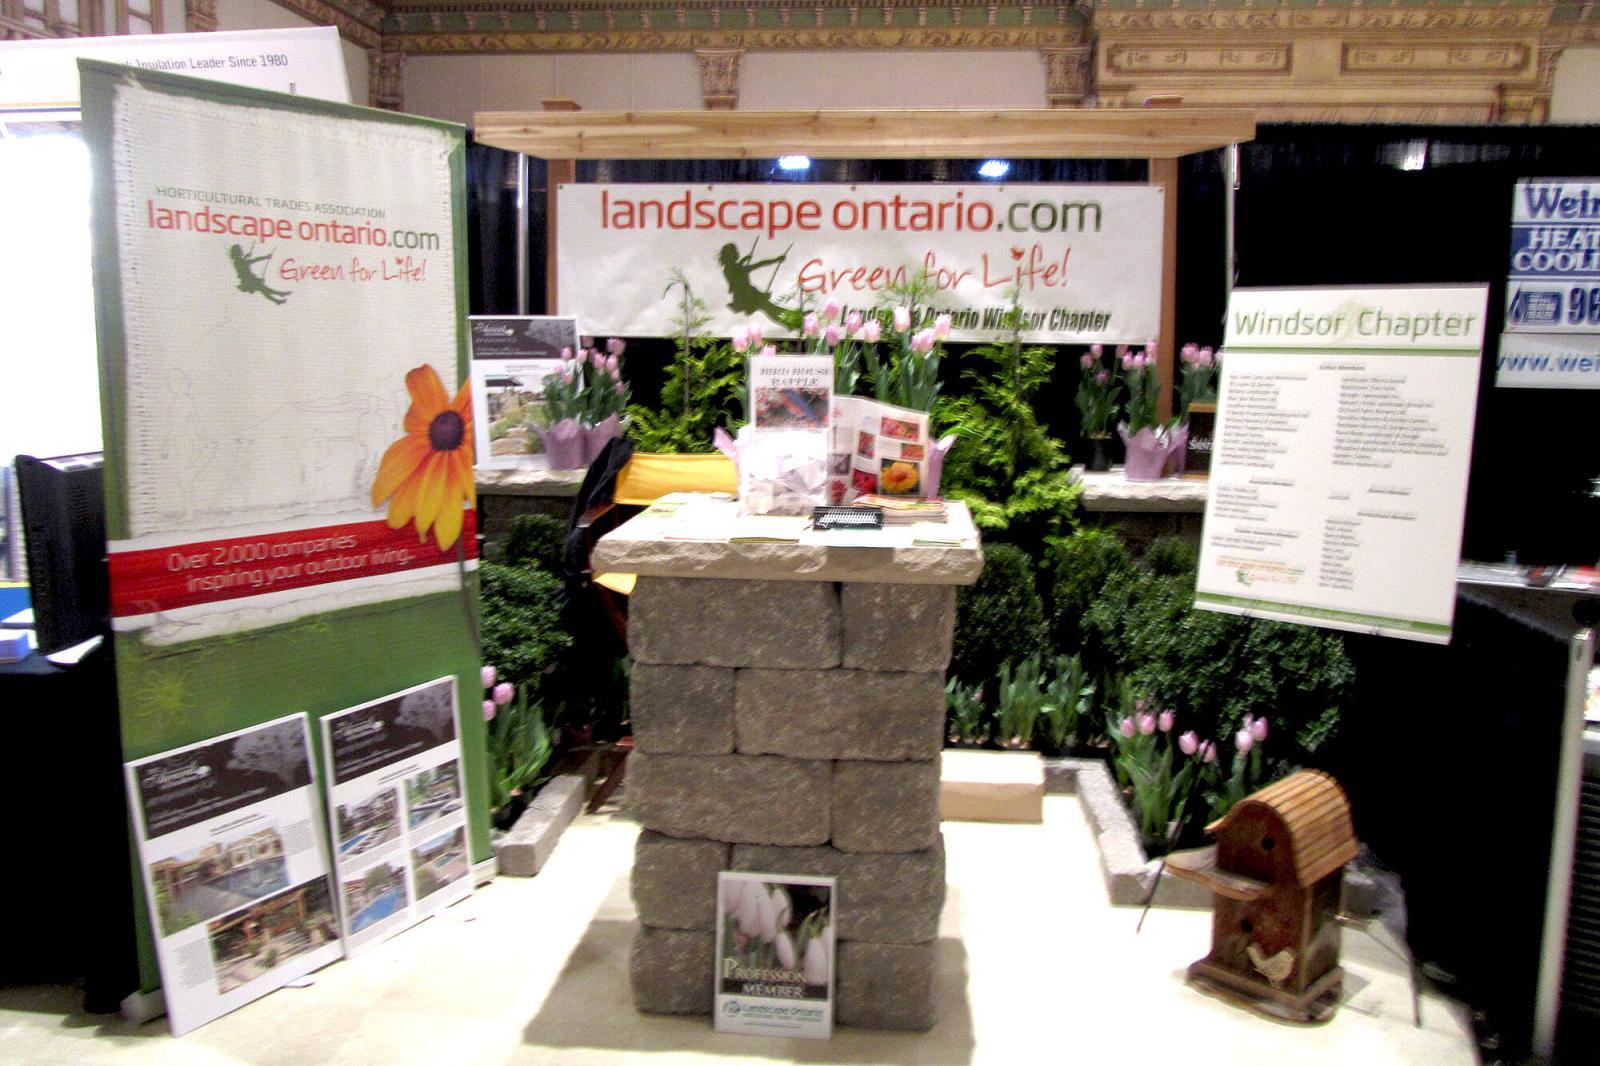 The Windsor Chapter had many inquiries relating to Landscape Ontario at its booth at the Greater Windsor Home Builders Association Home Show held Mar. 1 to 3.